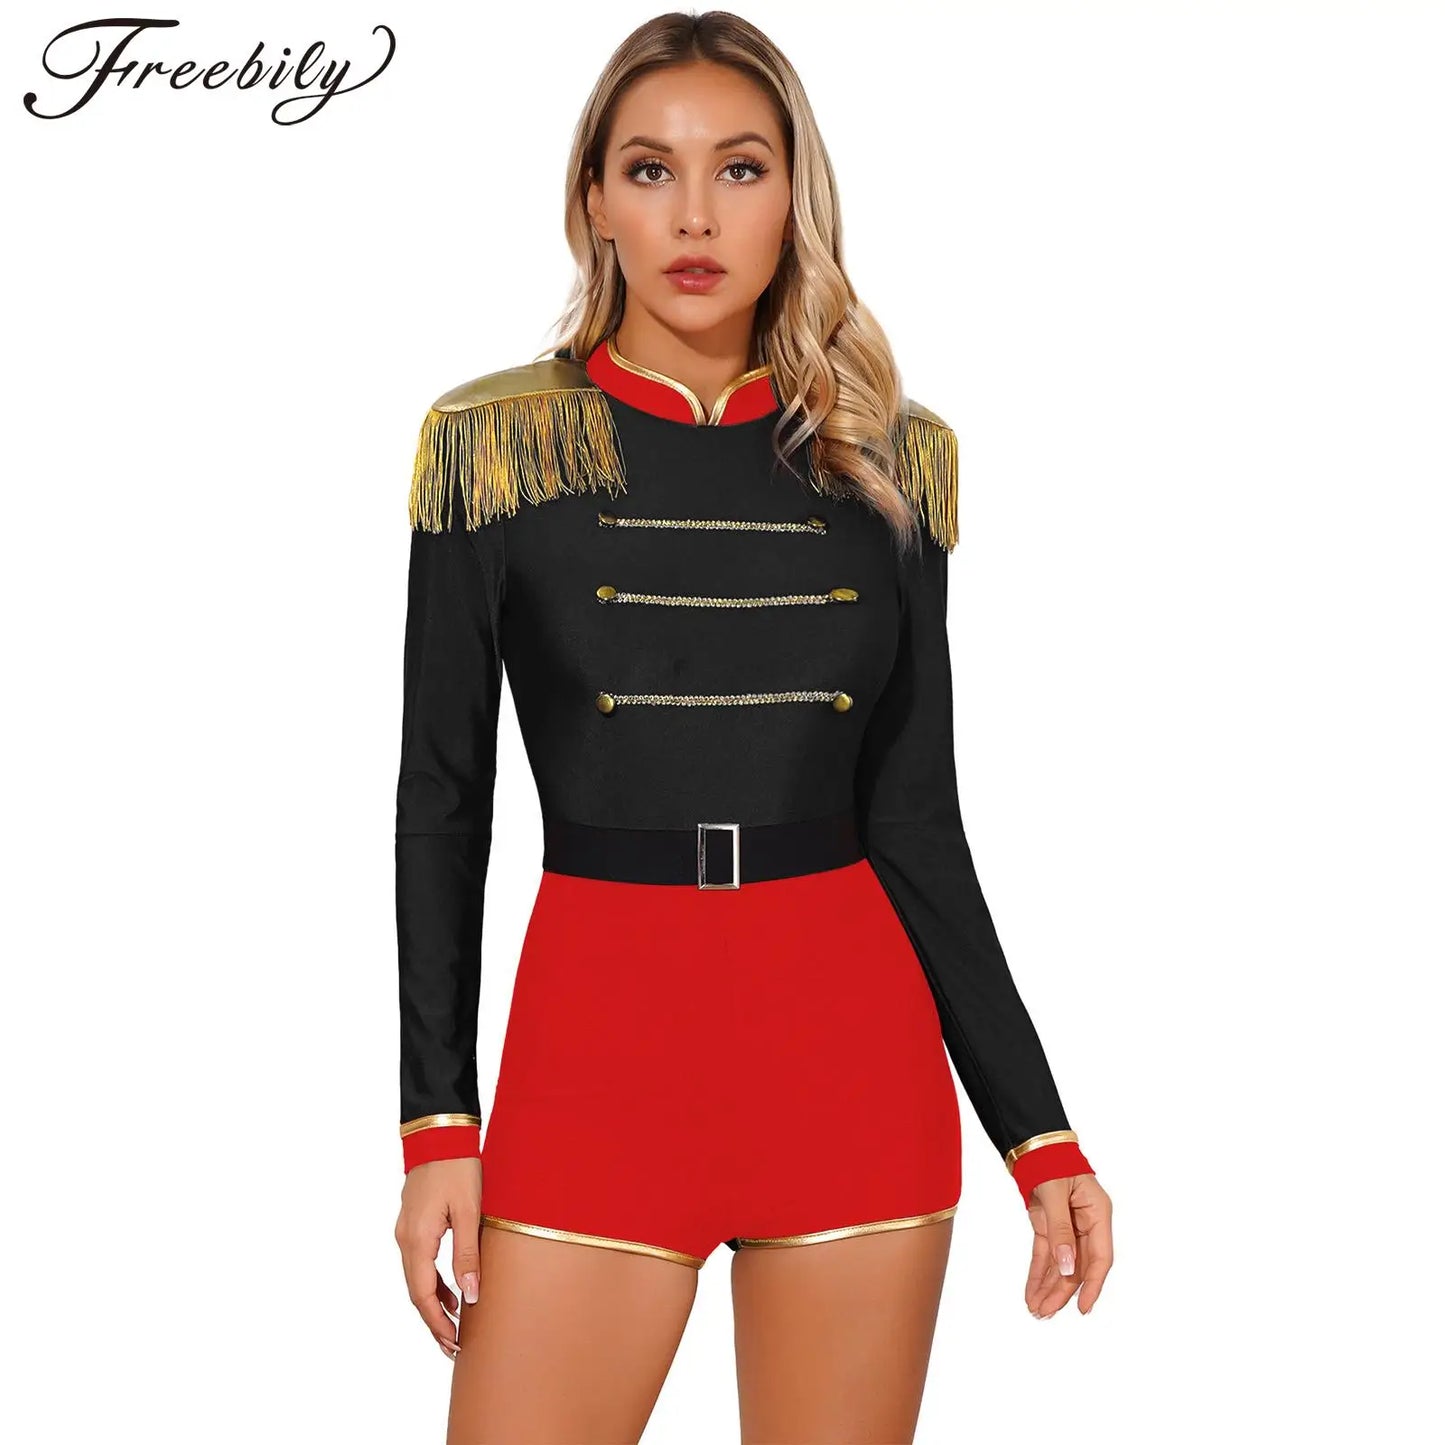 Womens Halloween Party Circus Ringmaster Jumpsuit Costumes Fringe Shoulder Boards Gold Decorated Contrast Cosplay Bodysuit